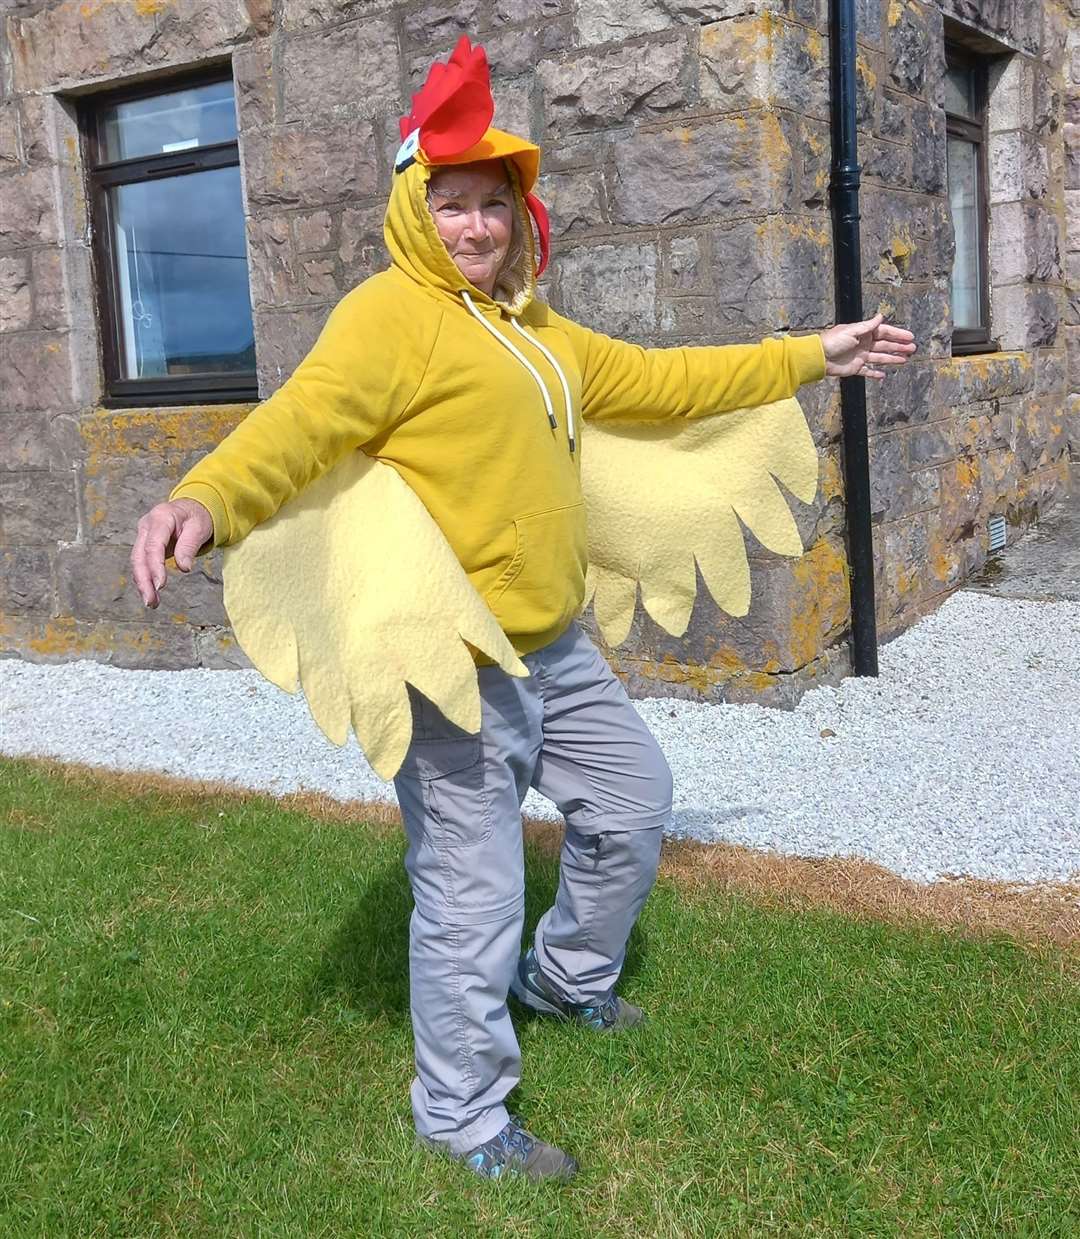 Elphin chicken enthusiast Anne O'Keefe created her Chicken Day costume for £7 from the charity shop.